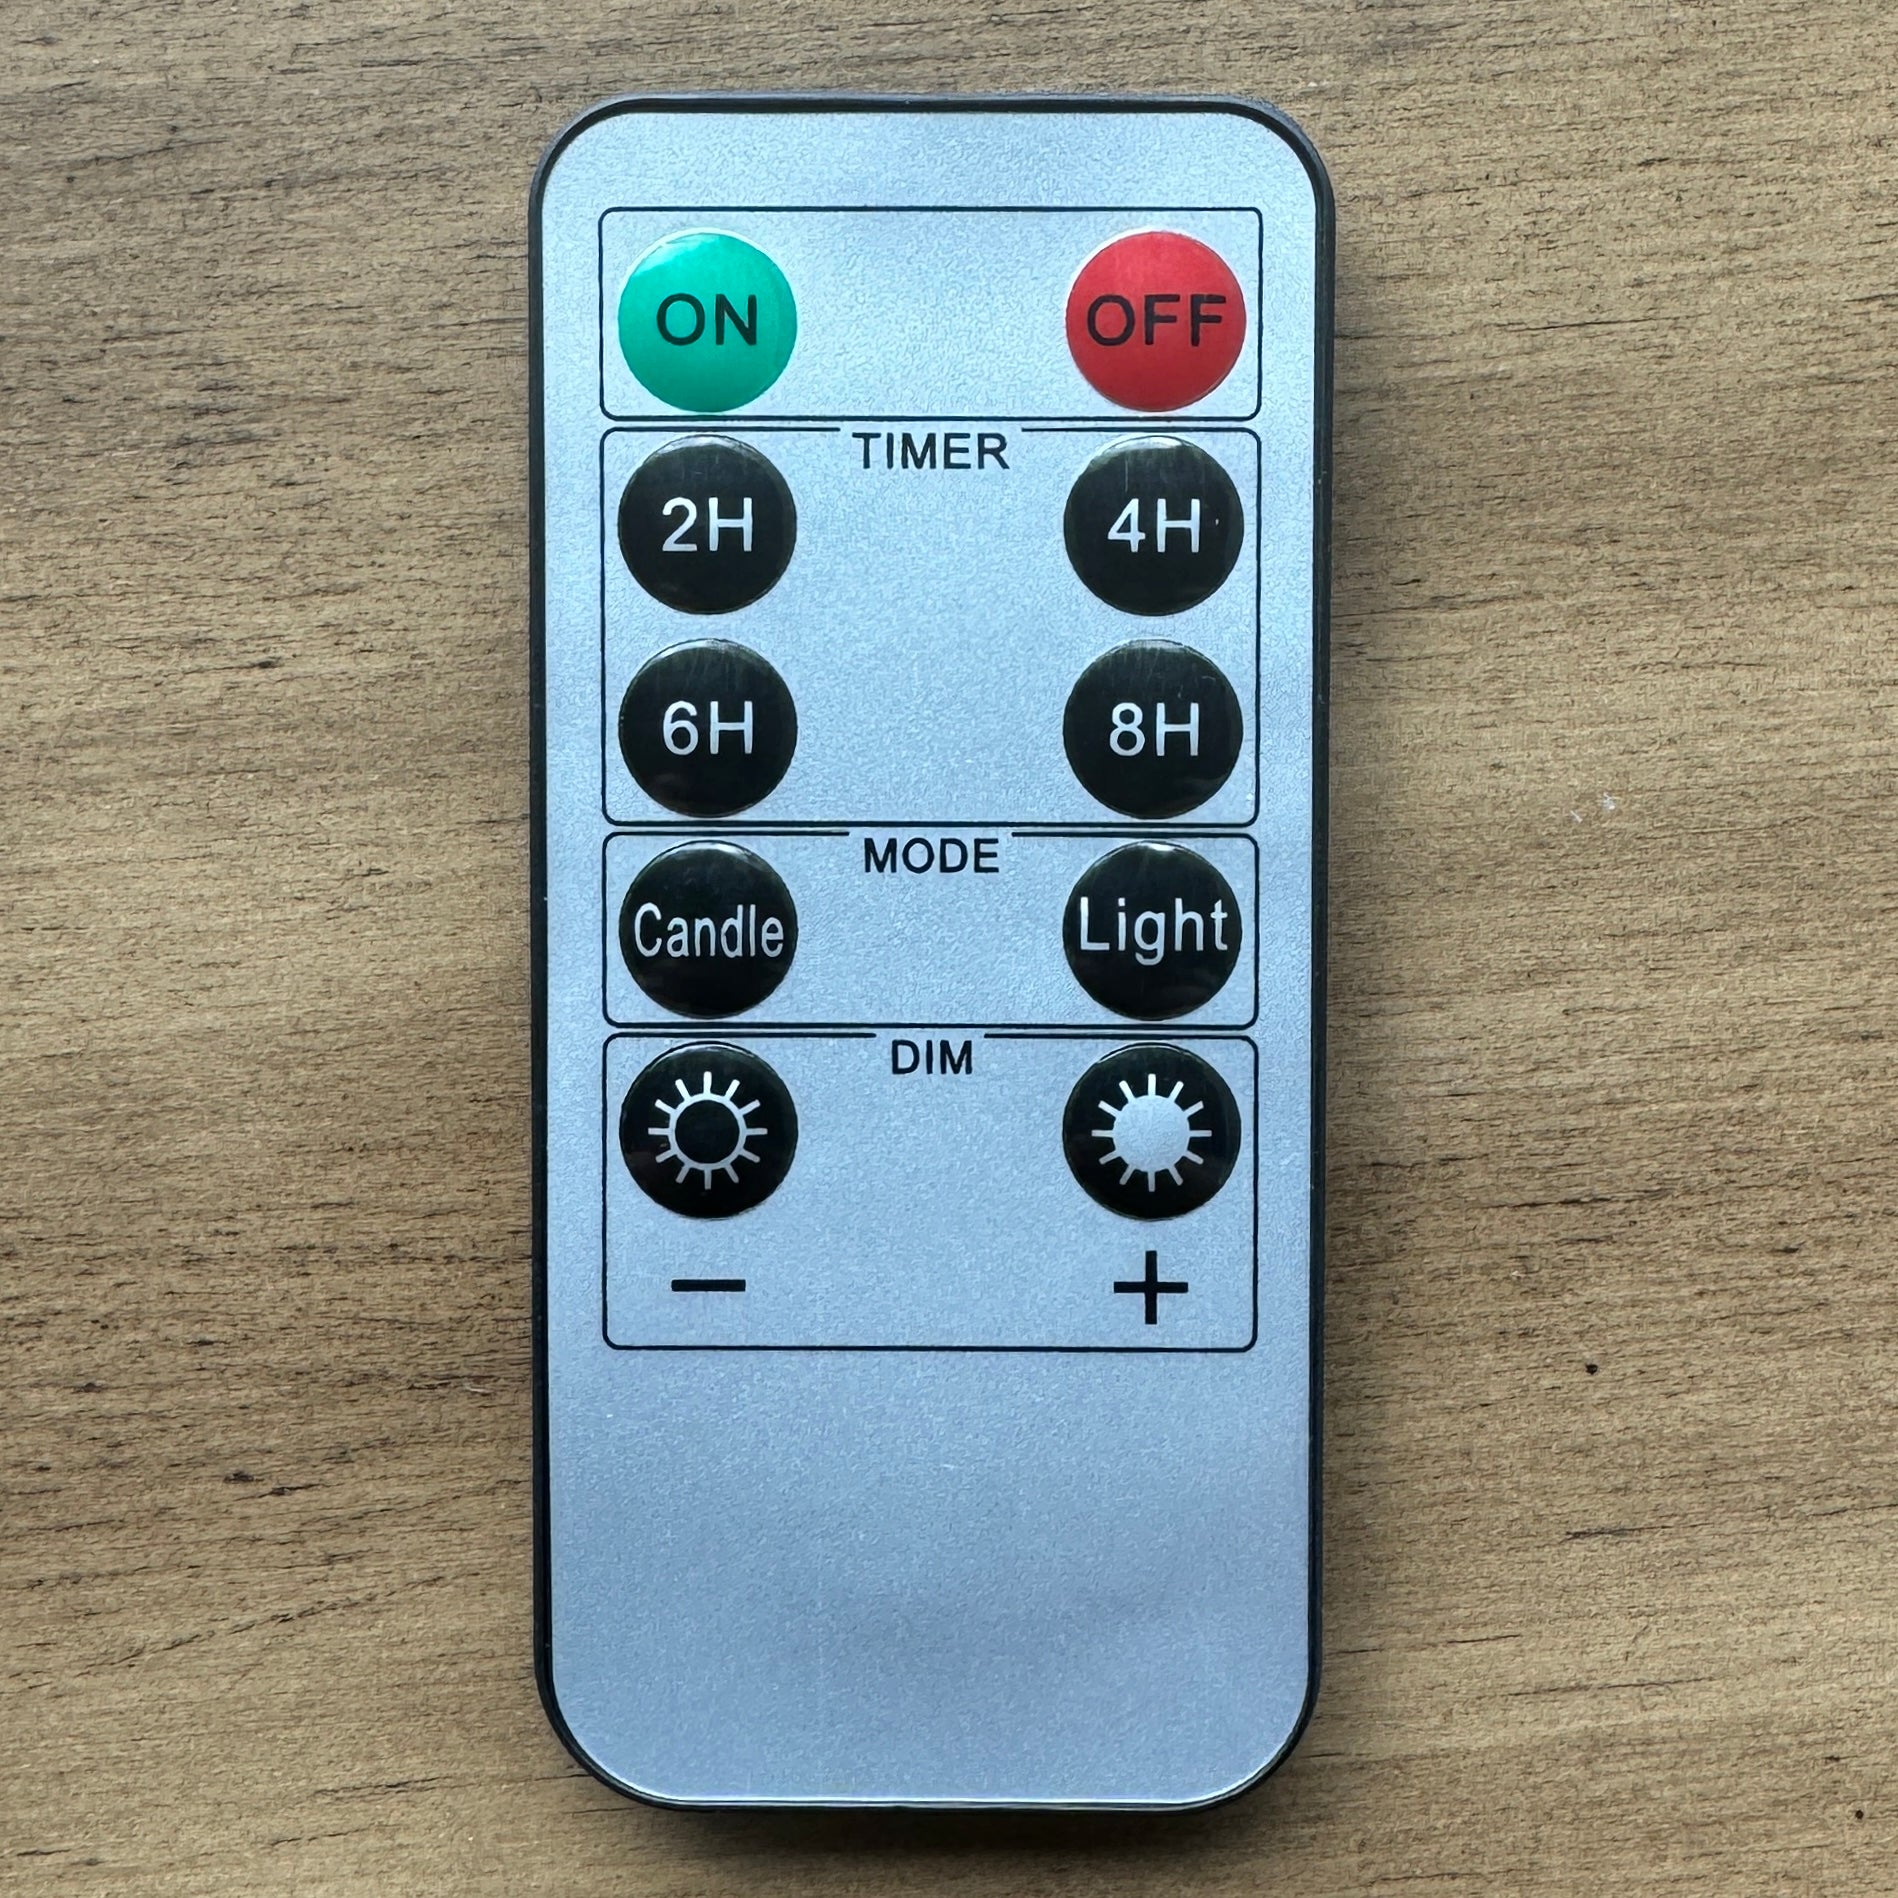 10 BUTTON REMOTE CONTROL for flameless candles - Interior Delights